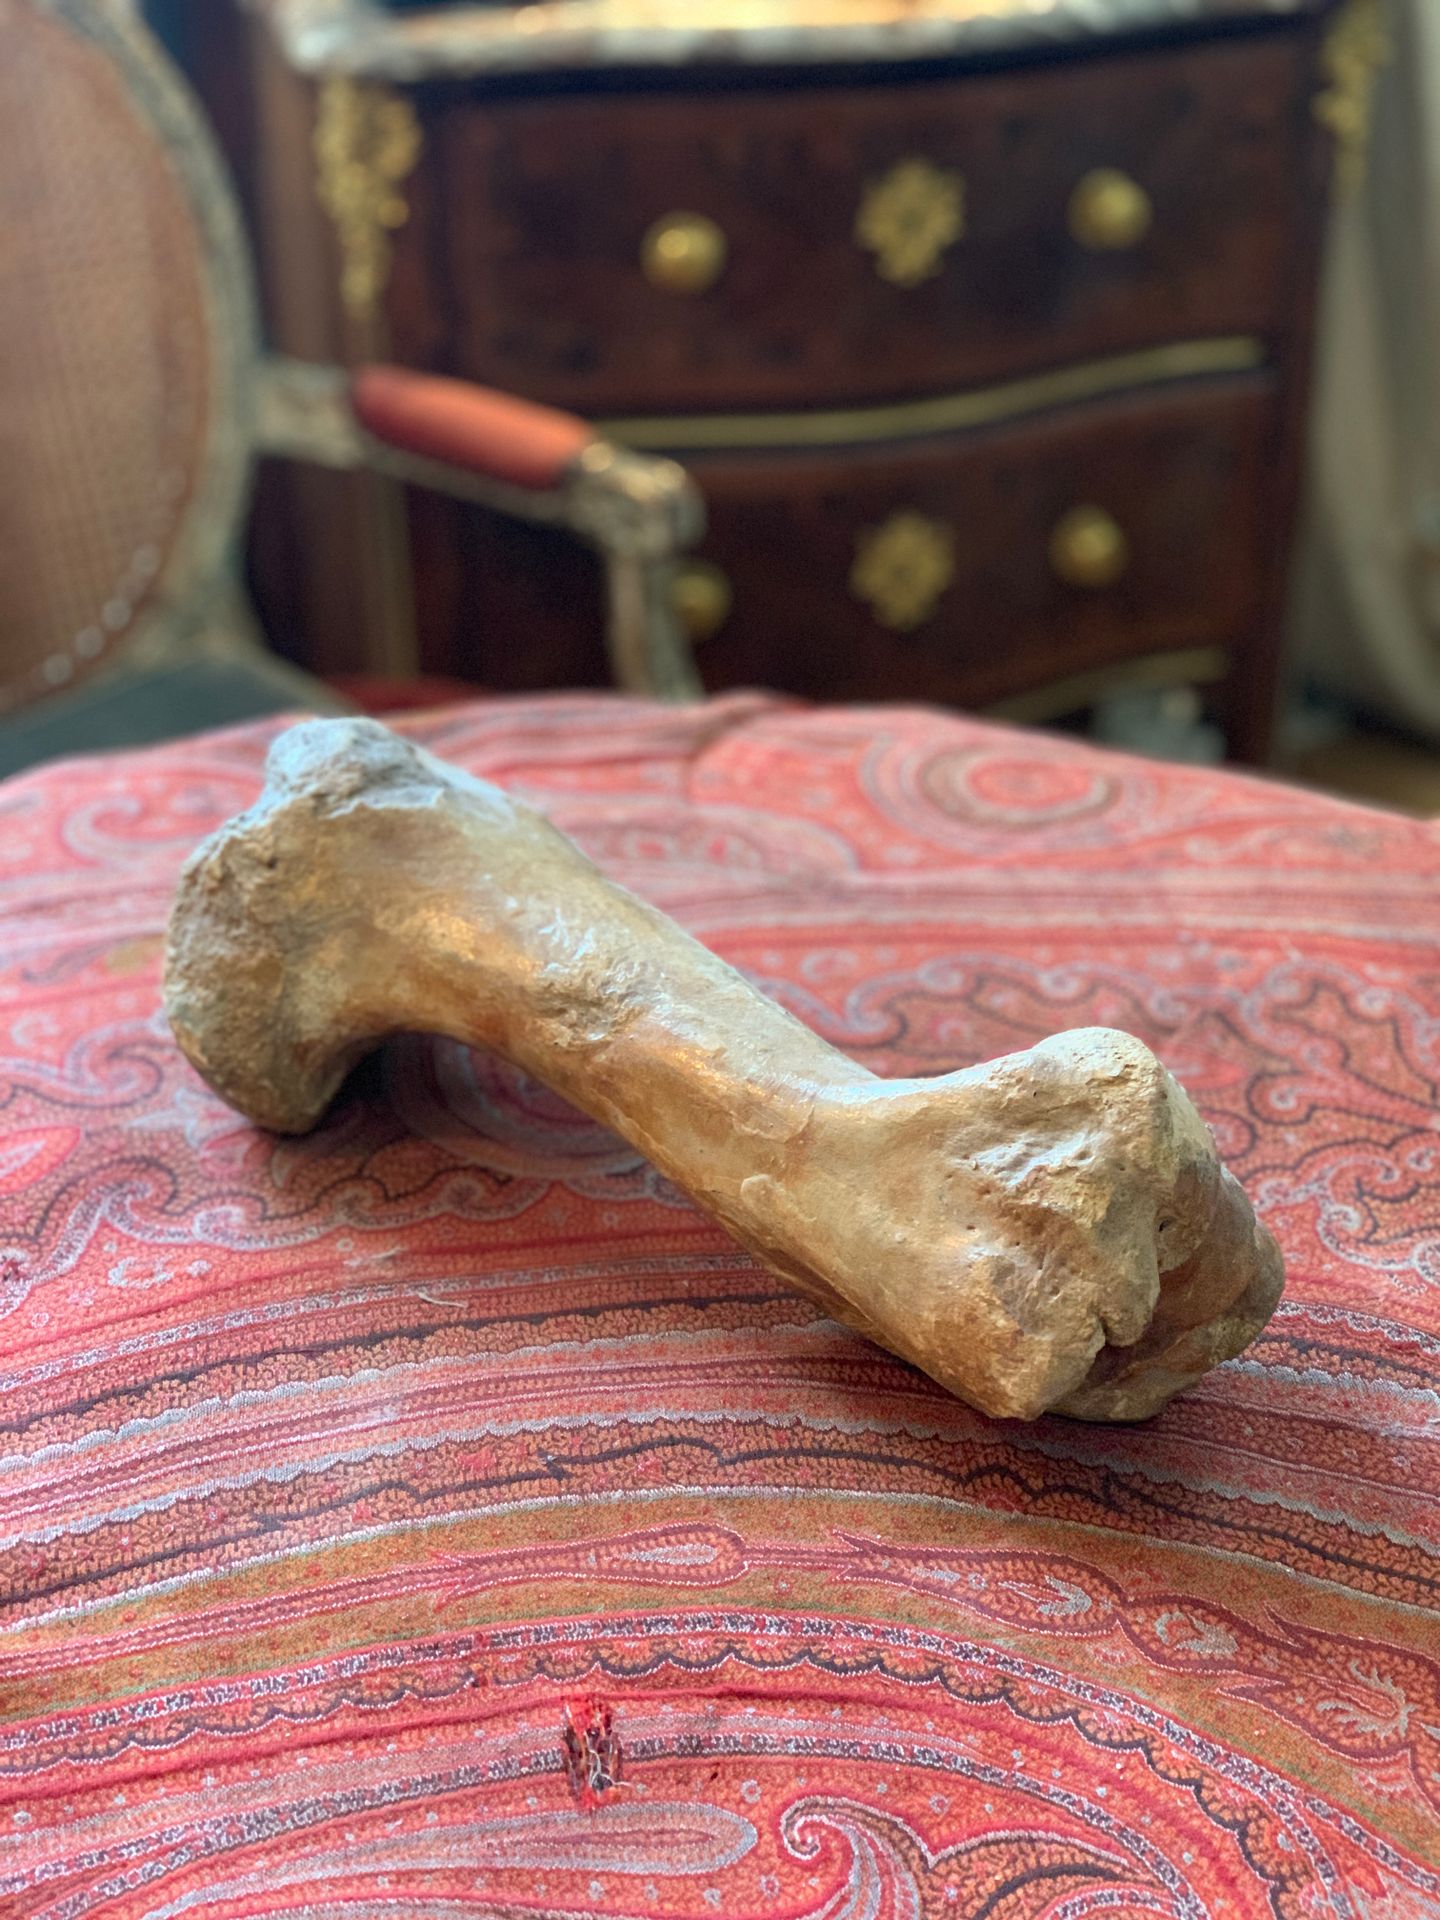 Null Fossilized bison humerus.

Length : 35 cm